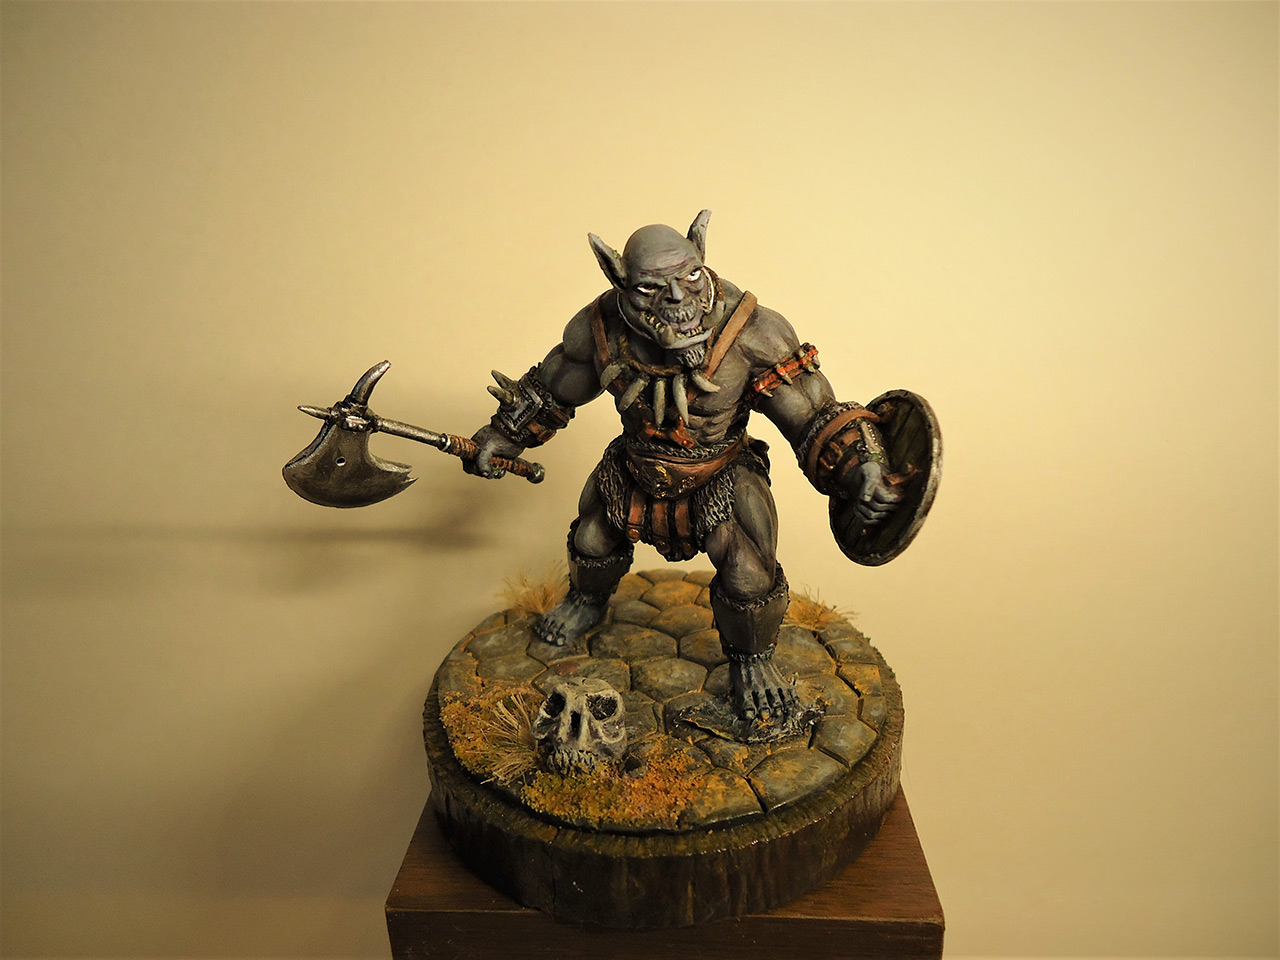 Miscellaneous: The Orc, photo #1